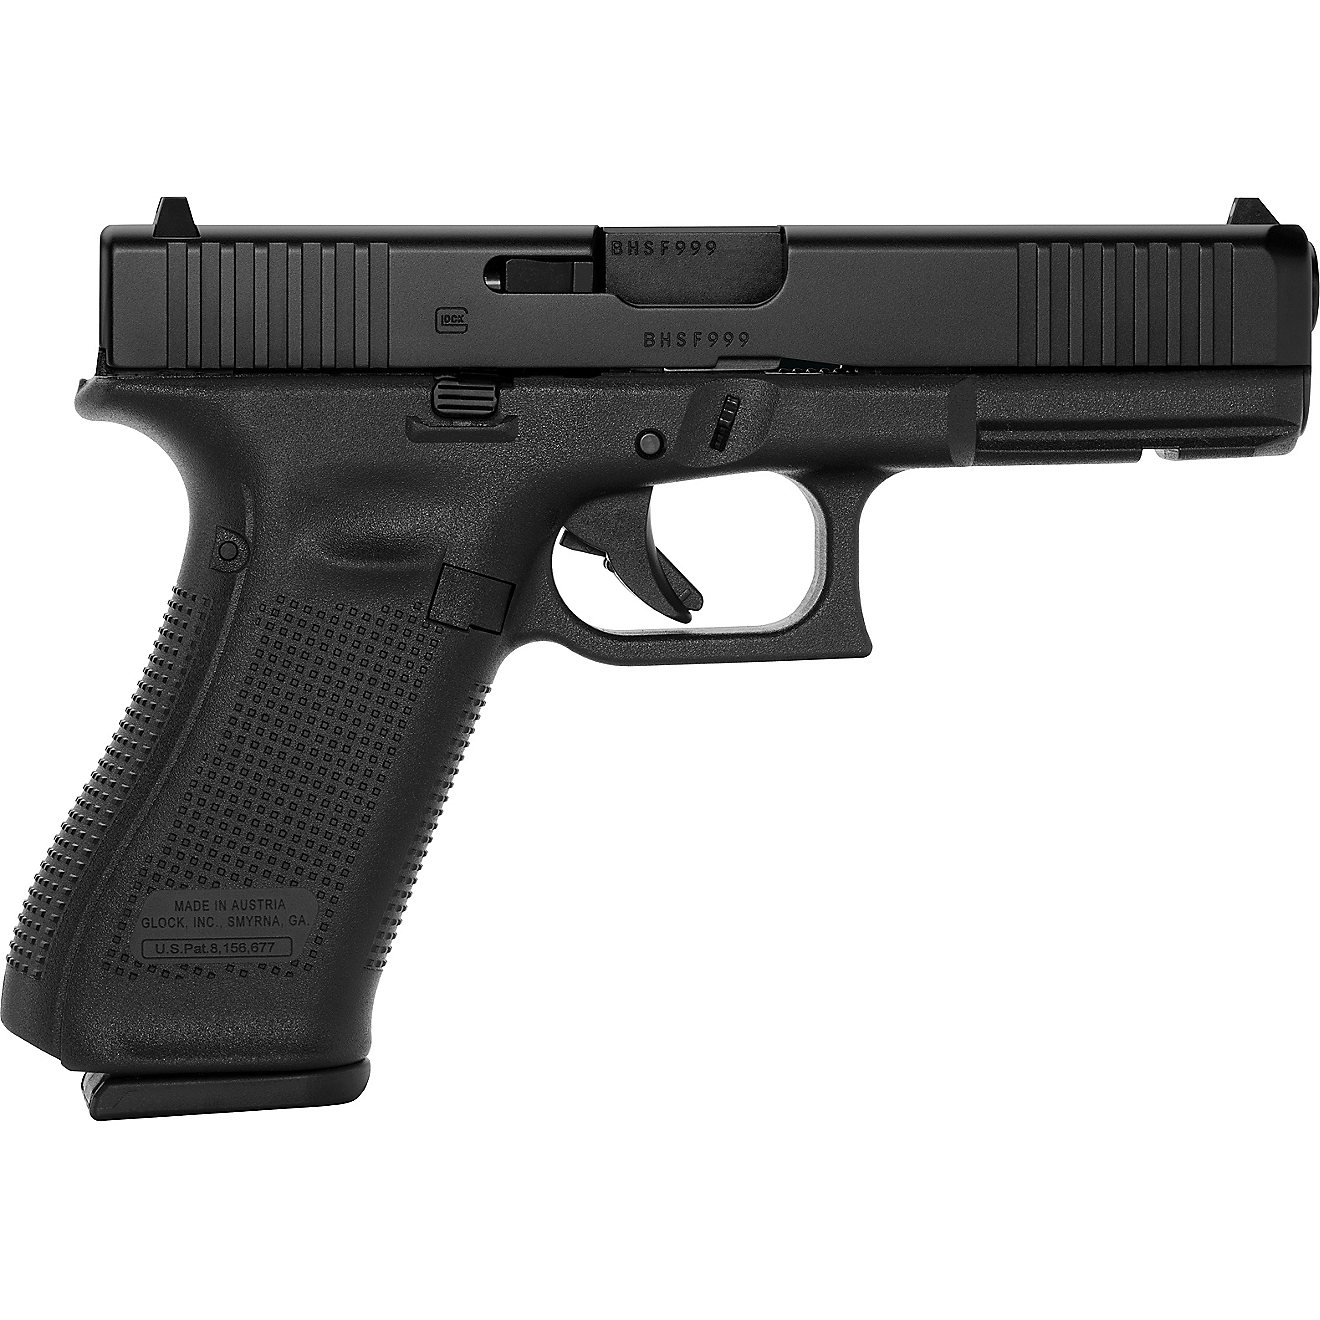 GLOCK G17 9mm Semiautomatic Pistol                                                                                               - view number 1